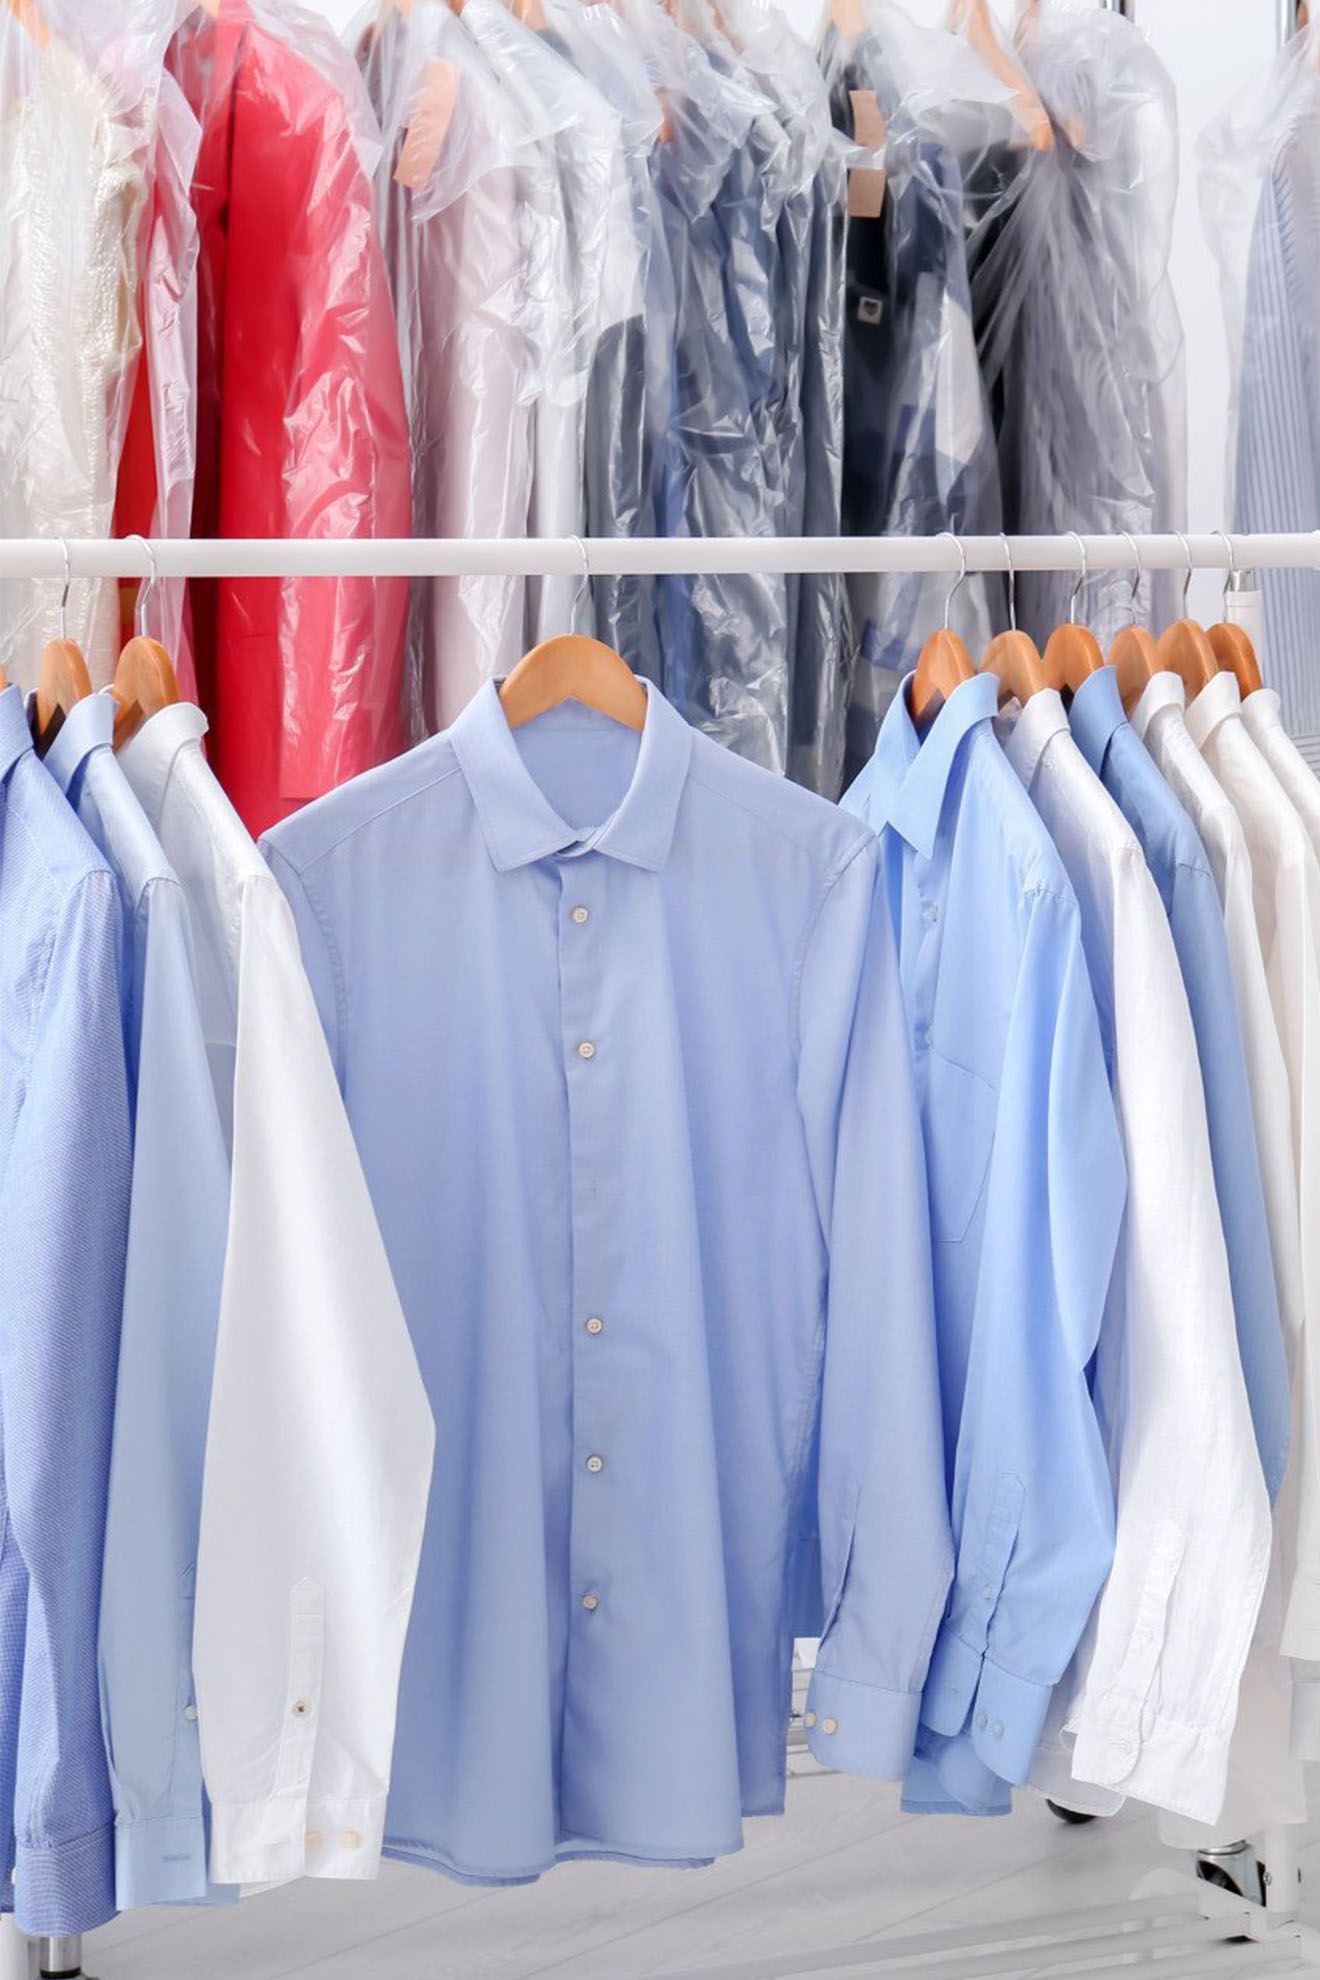 A row of shirts hanging on a rack in a dry cleaner